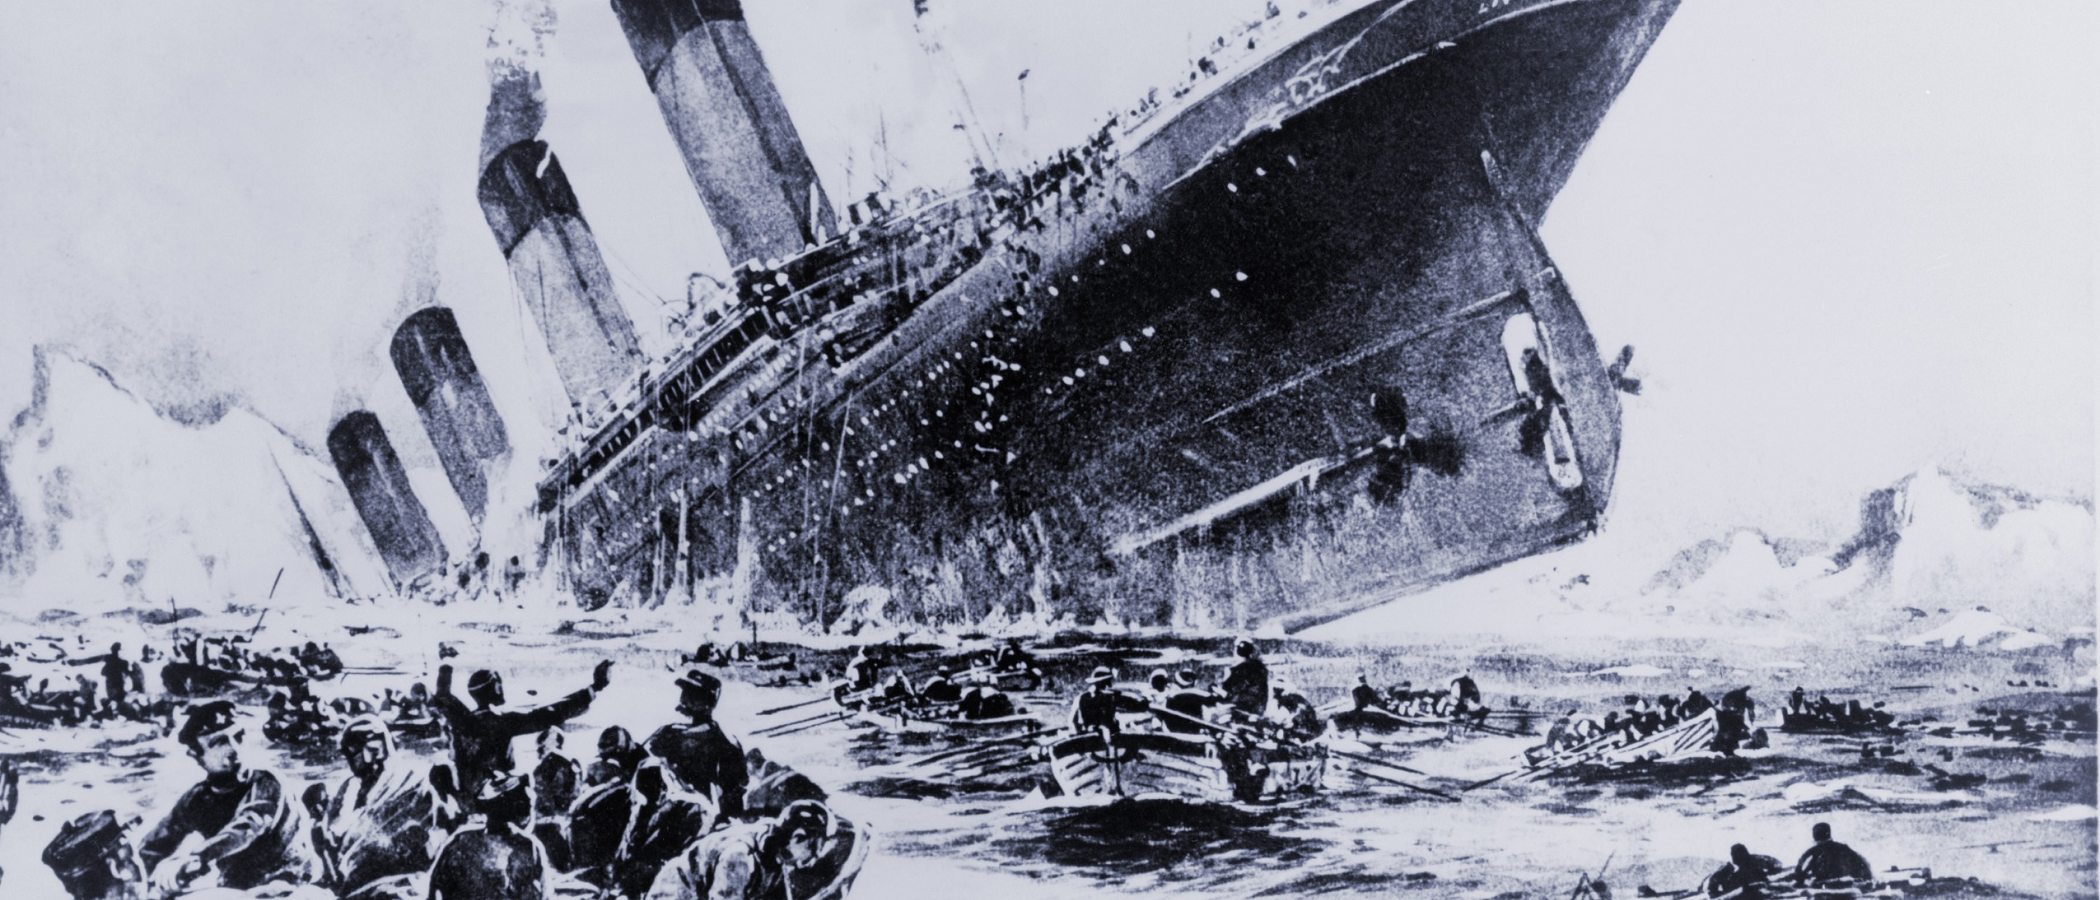 illustration of the Titanic sinking surrounded by lifeboats